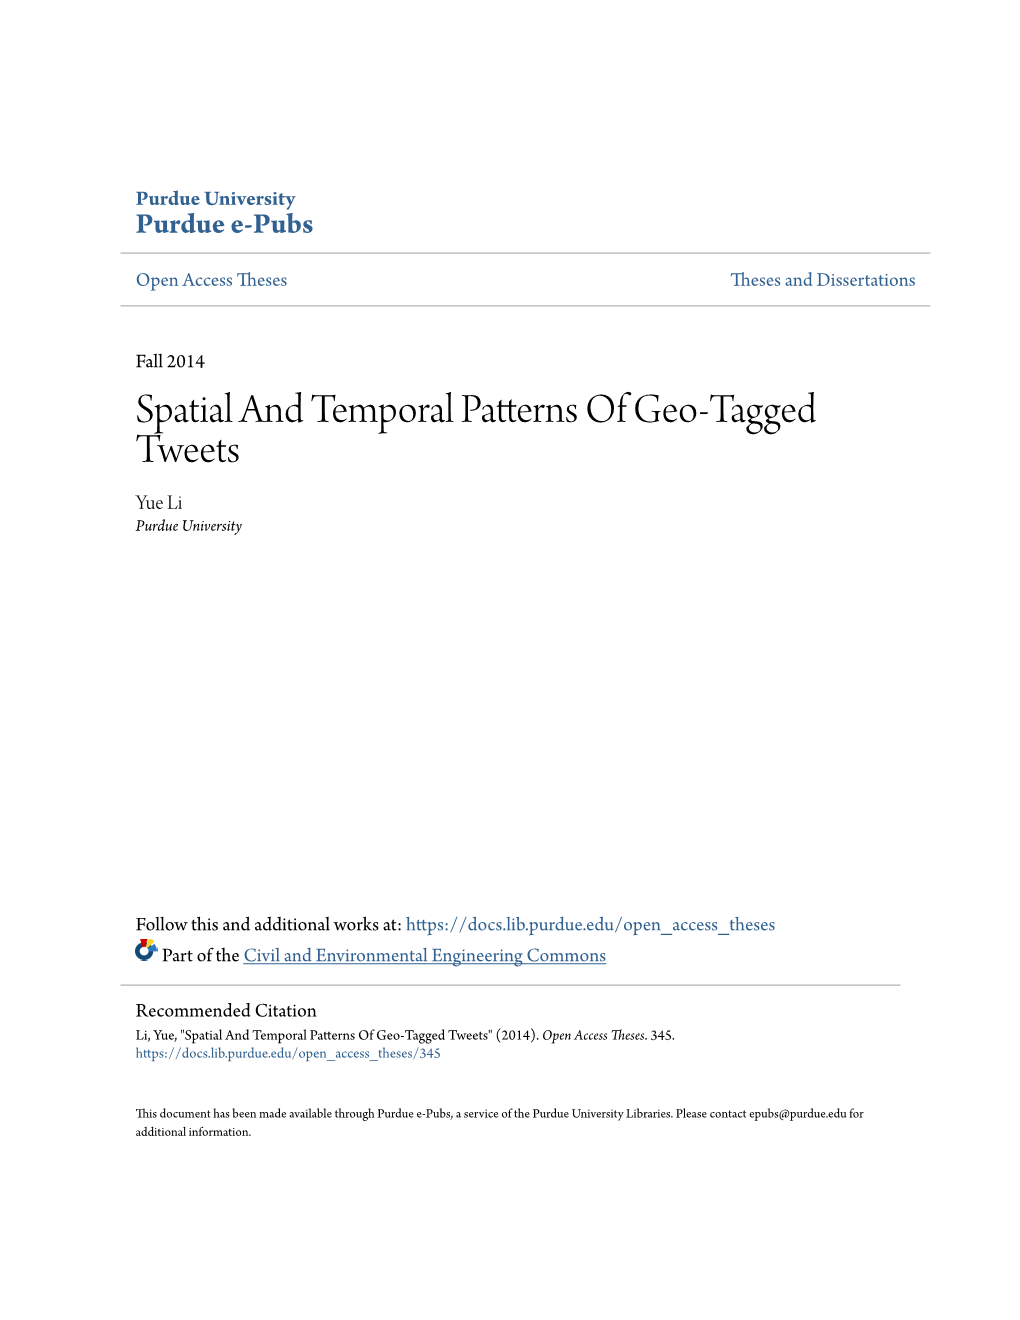 Spatial and Temporal Patterns of Geo-Tagged Tweets Yue Li Purdue University